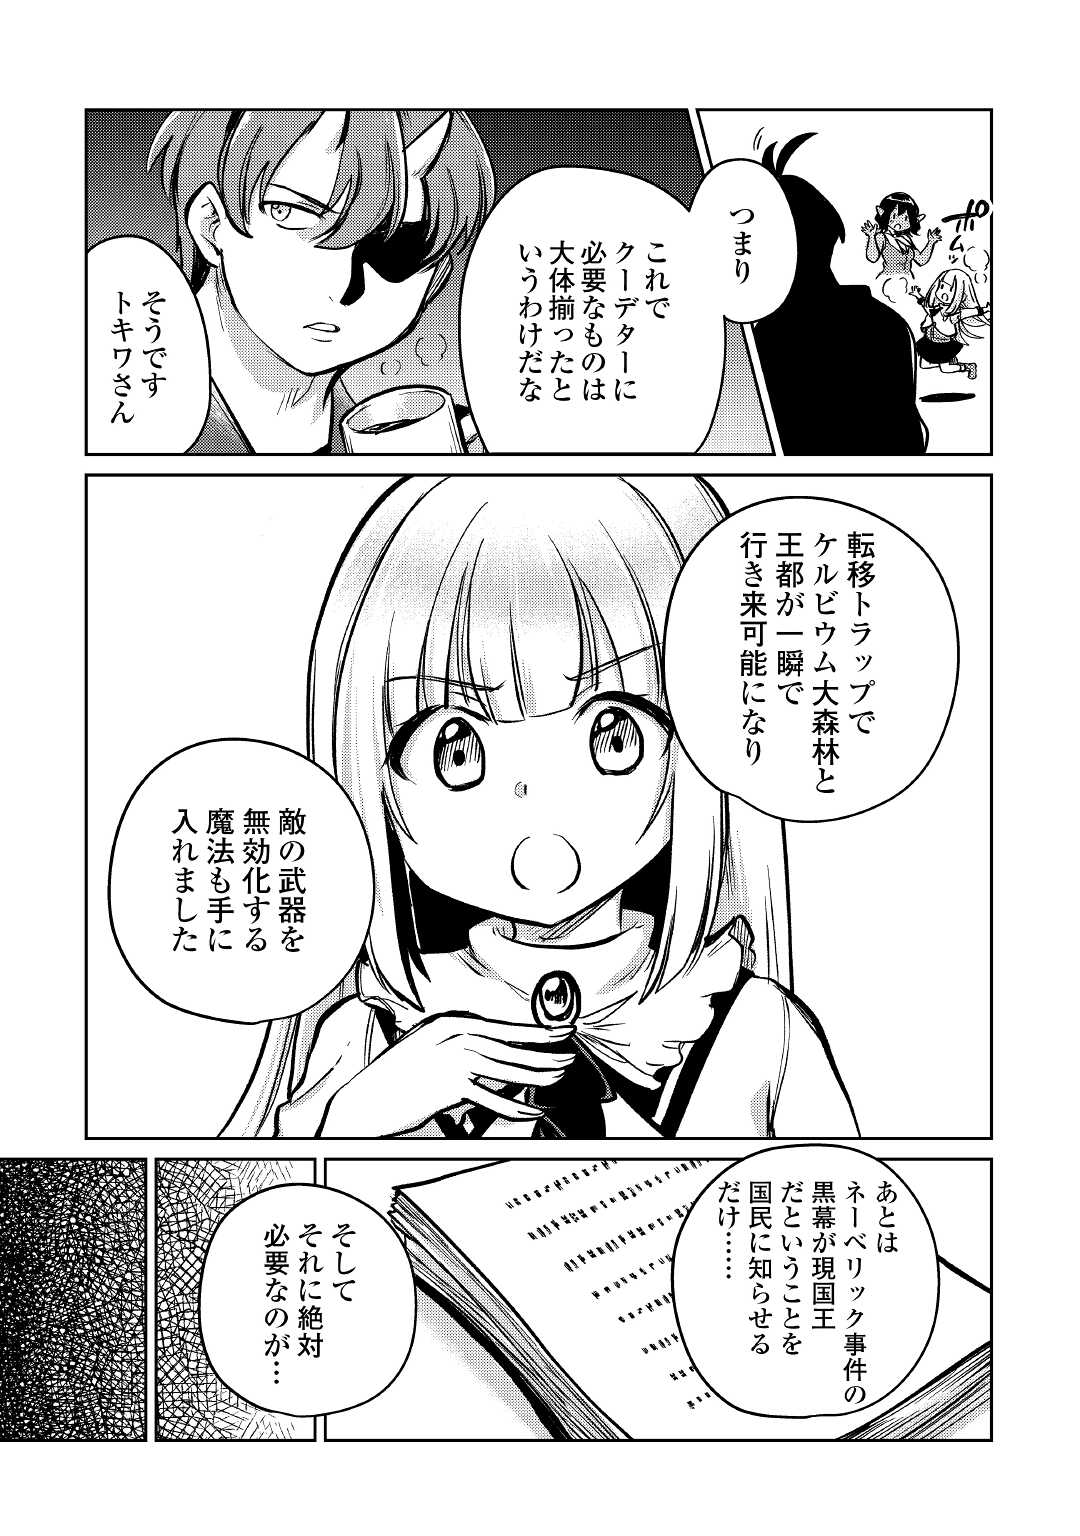 The Former Structural Researcher’s Story of Otherworldly Adventure 第35話 - Page 23